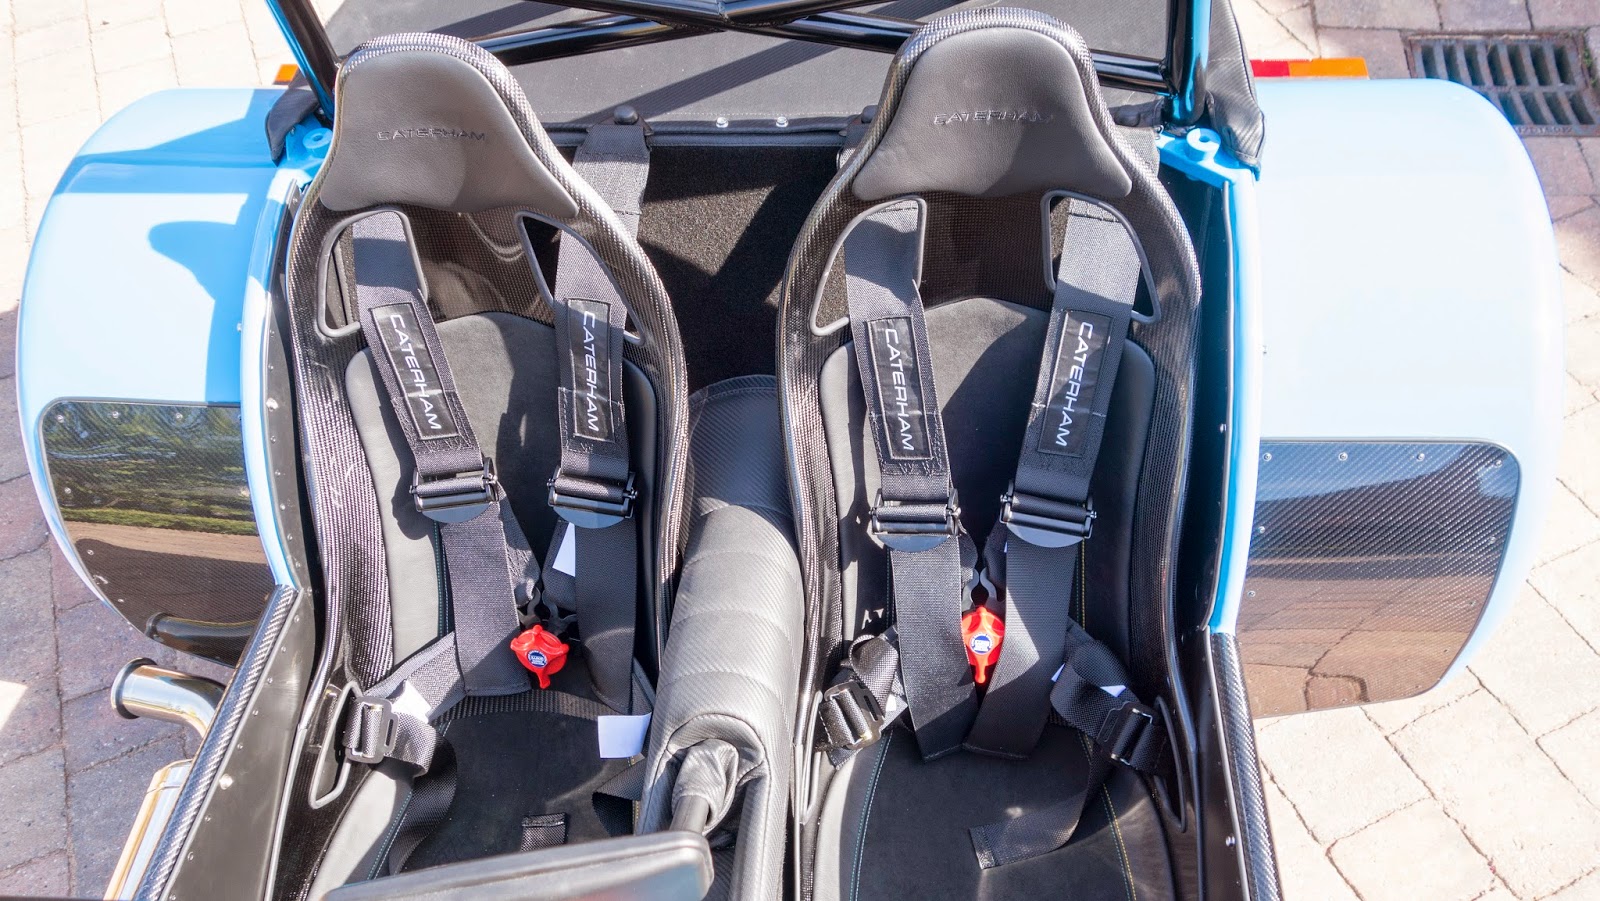 The 620R seats and harnesses - they really look amazing.